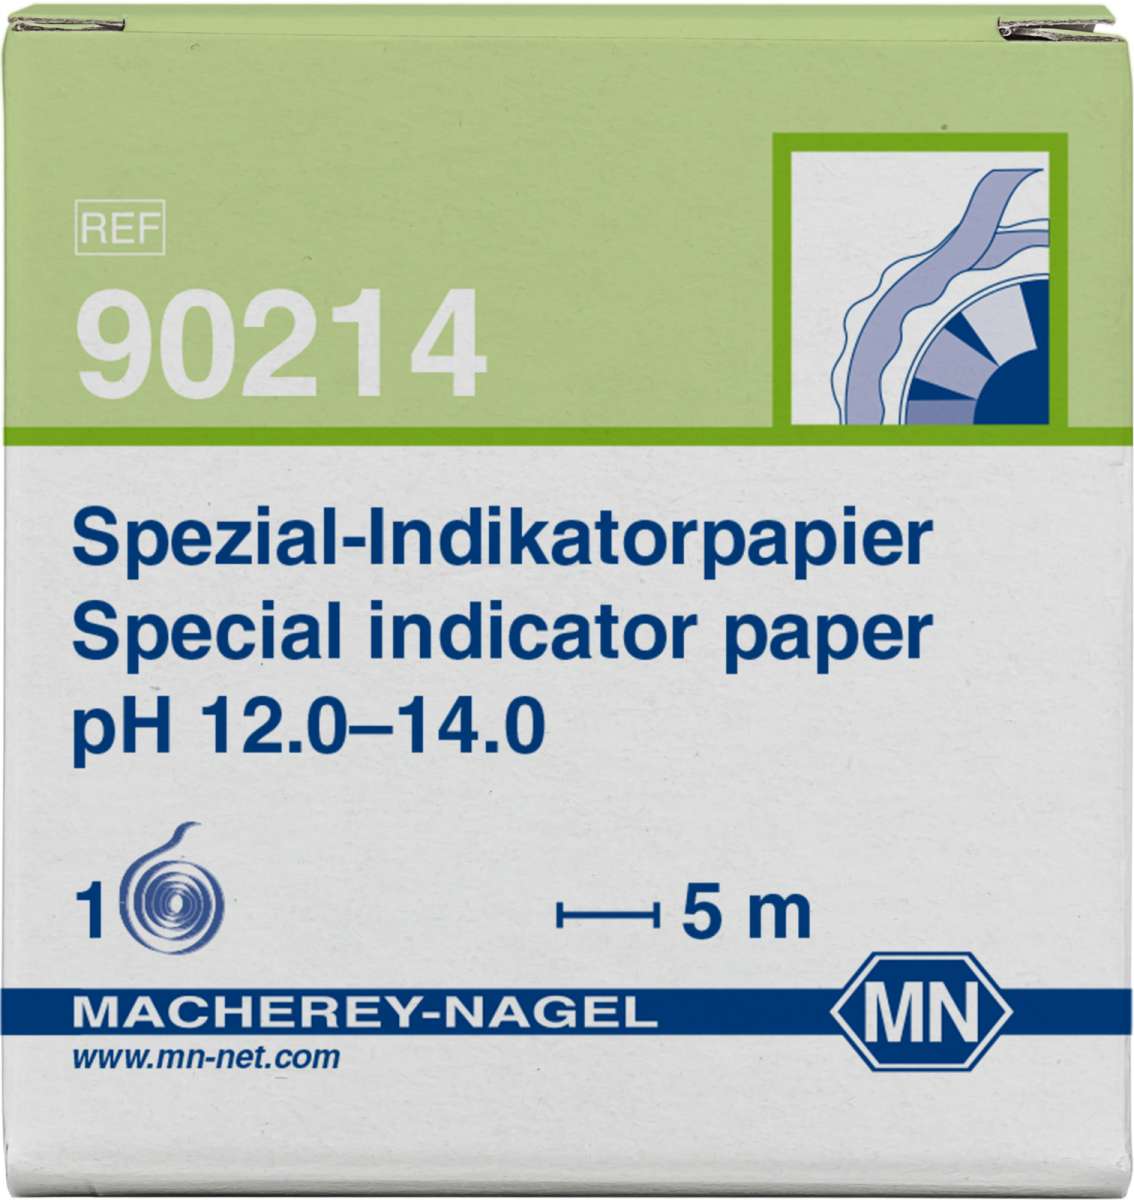 Refill pack for Special indicator paper pH 12.0 to 14.0 (3 reels of 5m length and 7mm width)